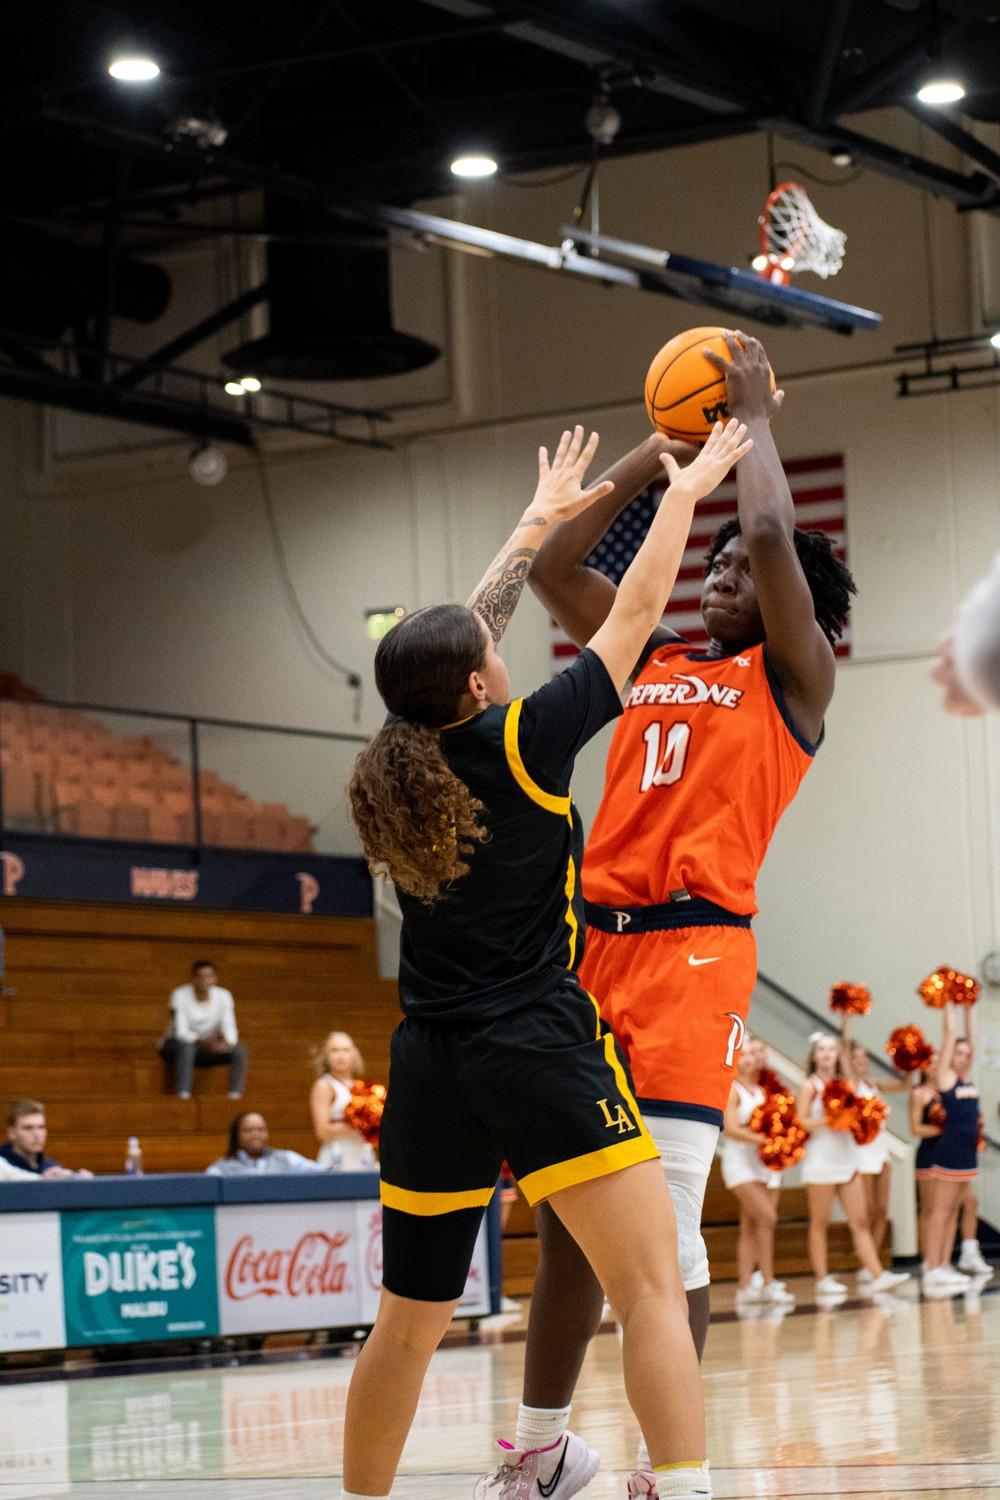 Junior forward Jane Nwaba goes up for a layup versus CSU Los Angeles at Firestone Fieldhouse on Nov. 2. Nwaba had five points and five rebounds in the game.